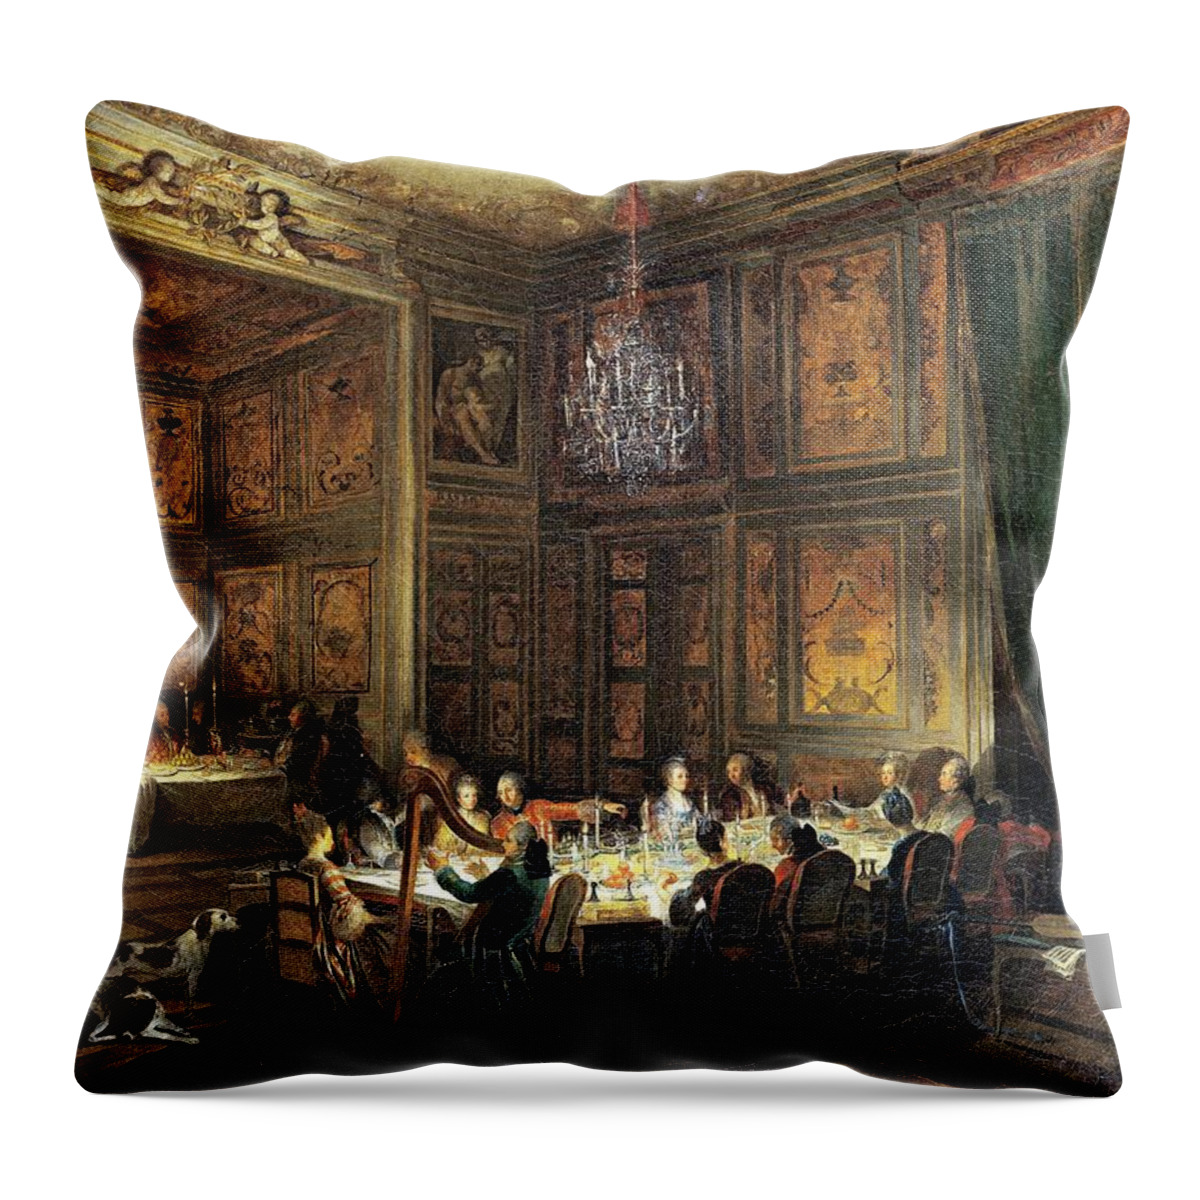 Fruit Throw Pillow featuring the photograph Dinner Of The Prince Of Conti 1717-76 In The Temple, 1766 Oil On Canvas by Michel Barthelemy Ollivier or Olivier